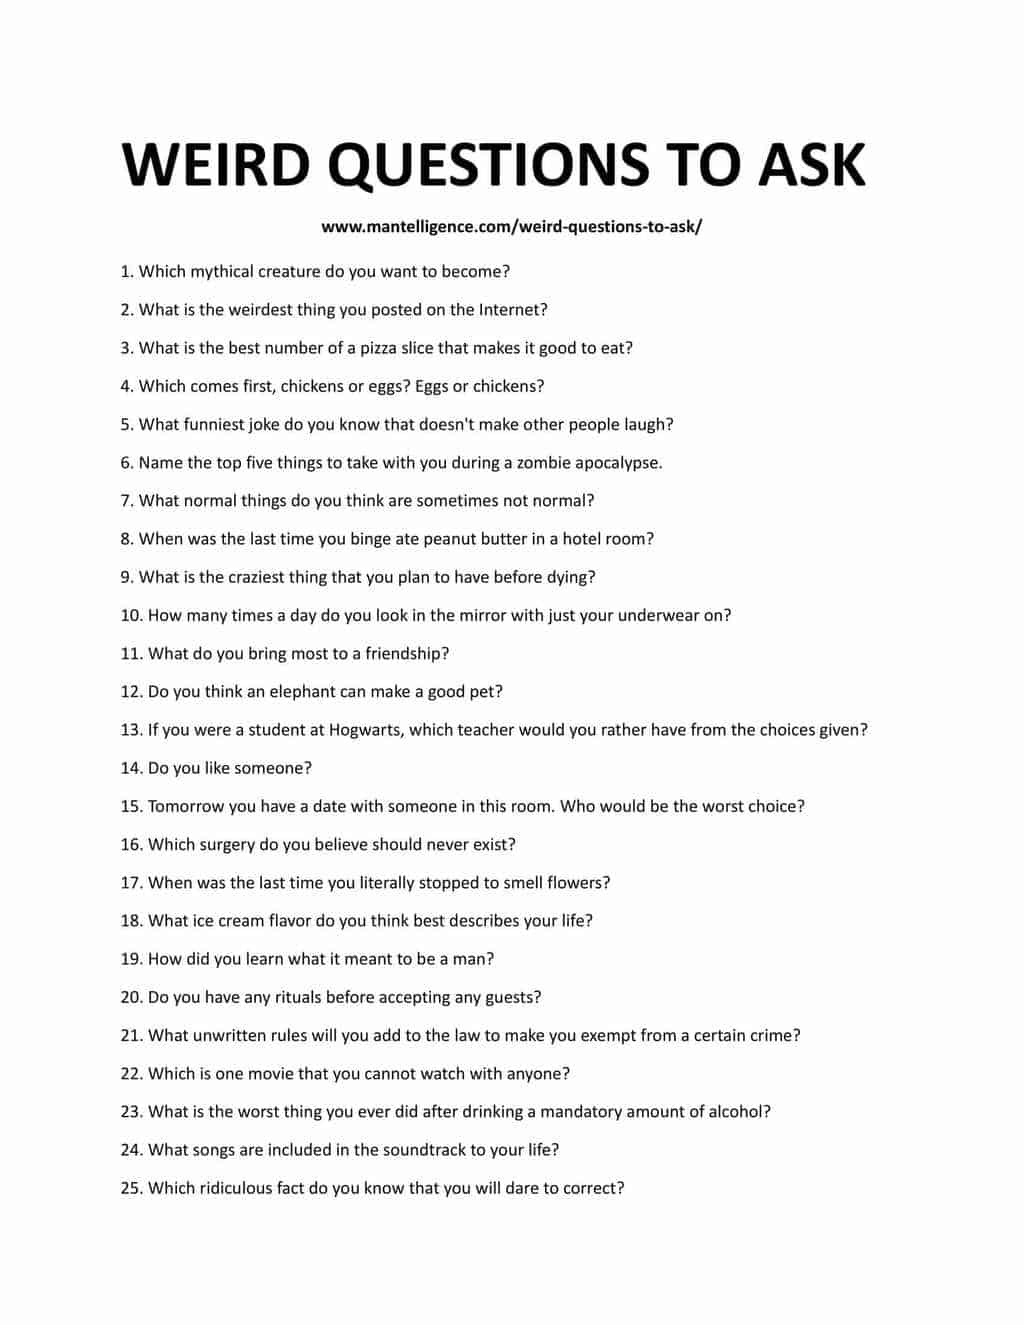 Downloadable list of questions 